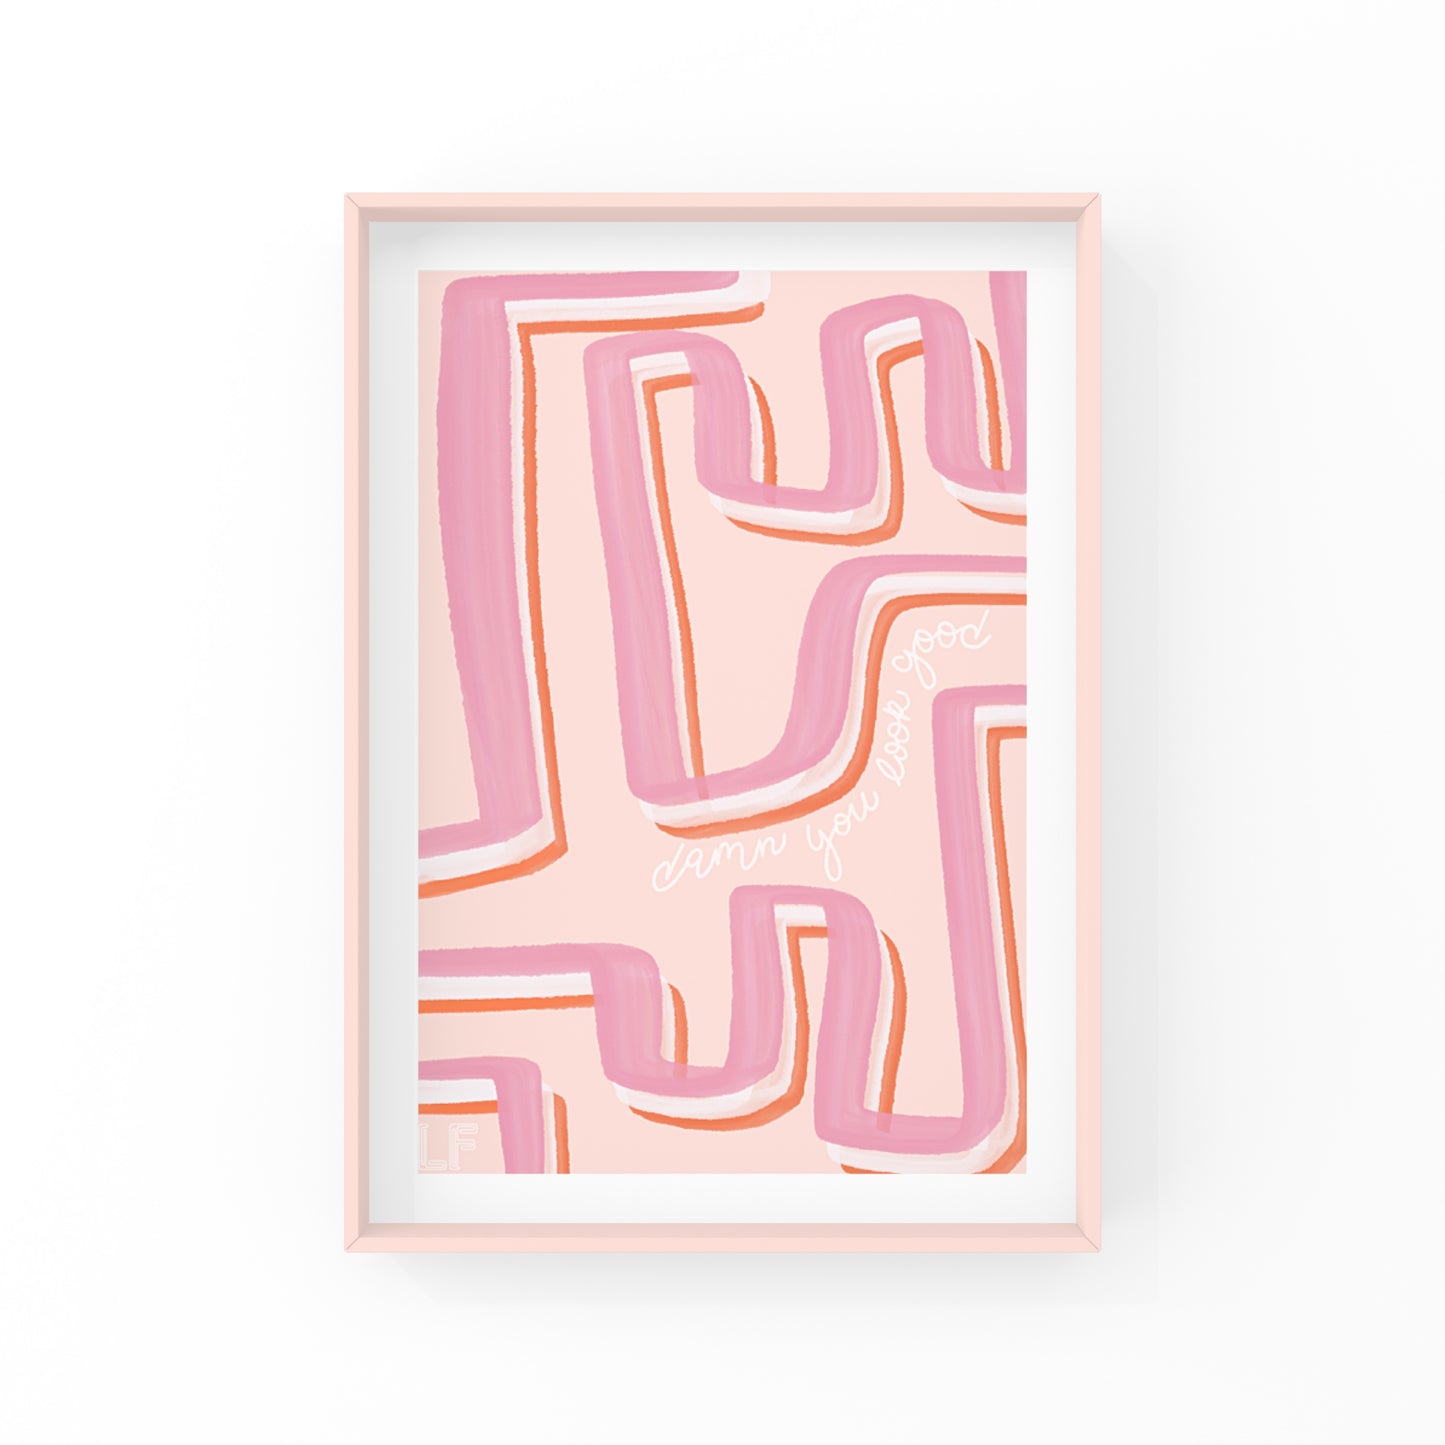 Need an instant mood booster? We got you. This bright and cheerful abstract art print will remind you and your guests how good they look every time they walk past it because it says "damn you look good" amidst the colorful, abstract lines.